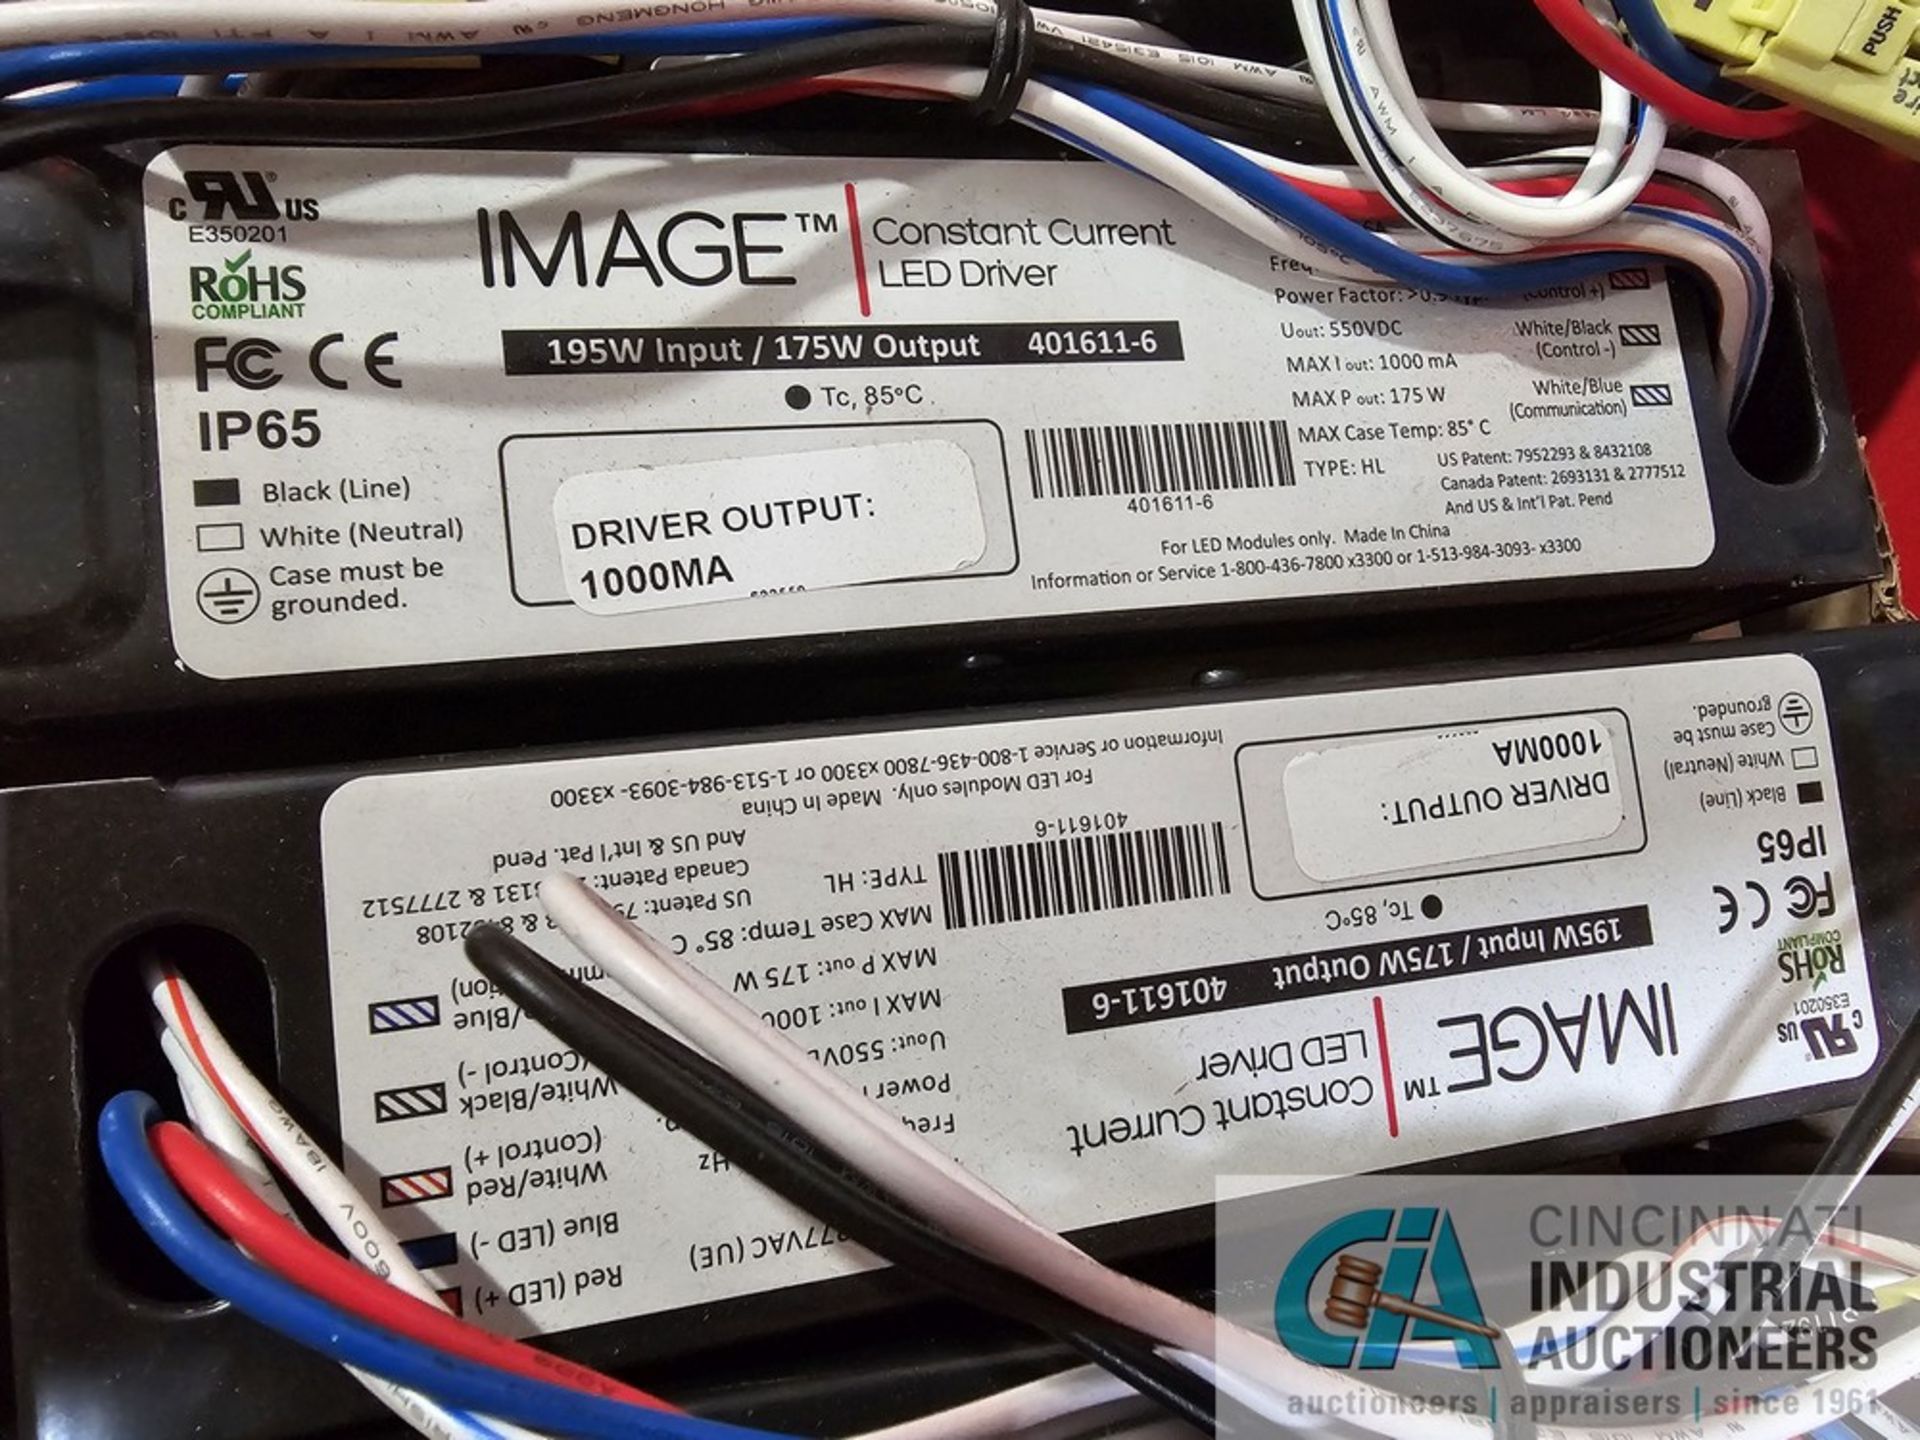 IMAGE CONSTANT CURRENT LED DRIVER, 195 W IMPUT / 175 W OUTPUT, DRIVER OUTPUT 1,000MA - Image 2 of 2